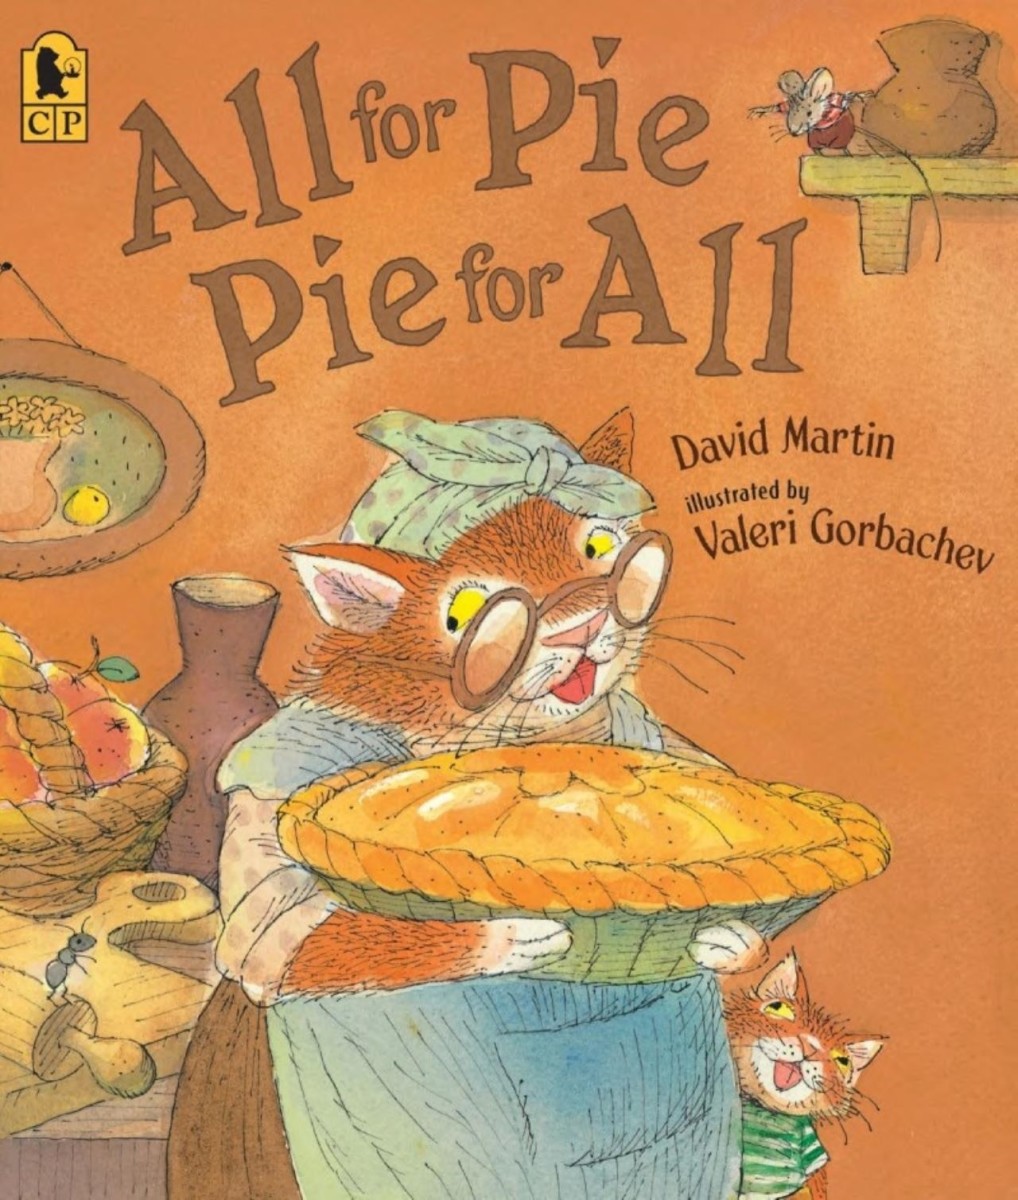 All for Pie, Pie for All by David Martin